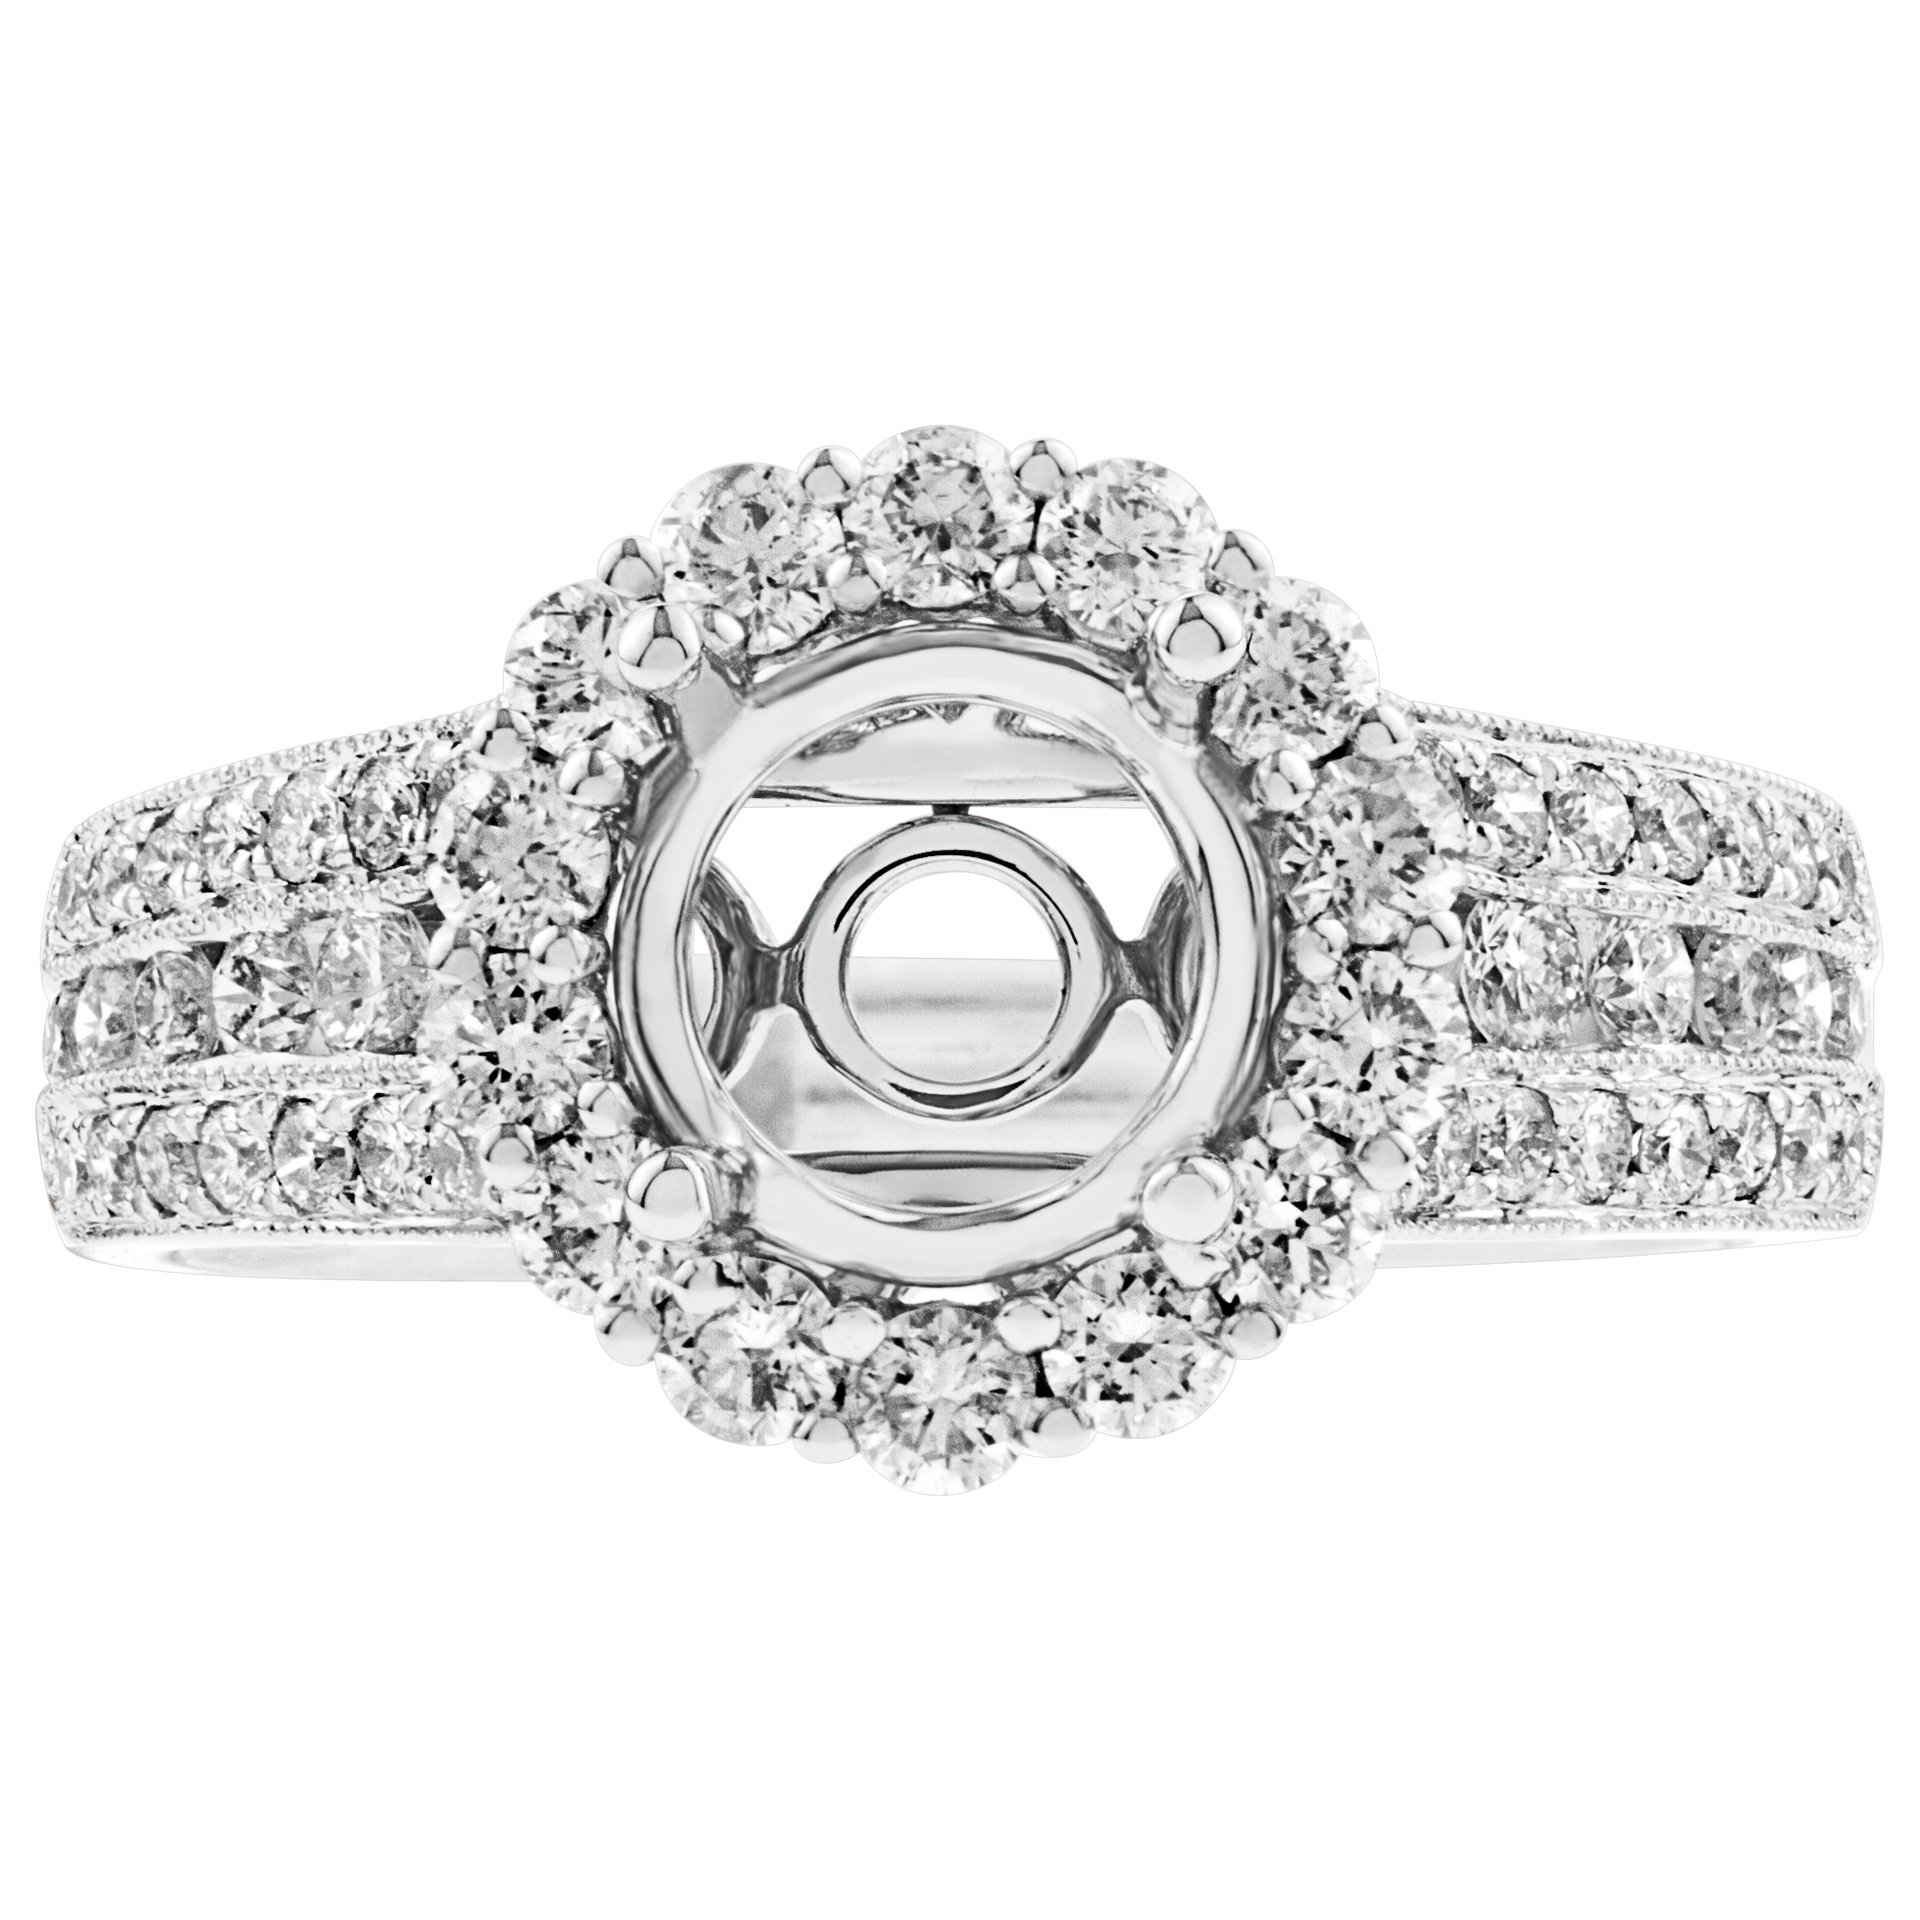 Ring setting in 18K white gold & diamonds. 1.04 carats in diamonds. Size 7 image 1